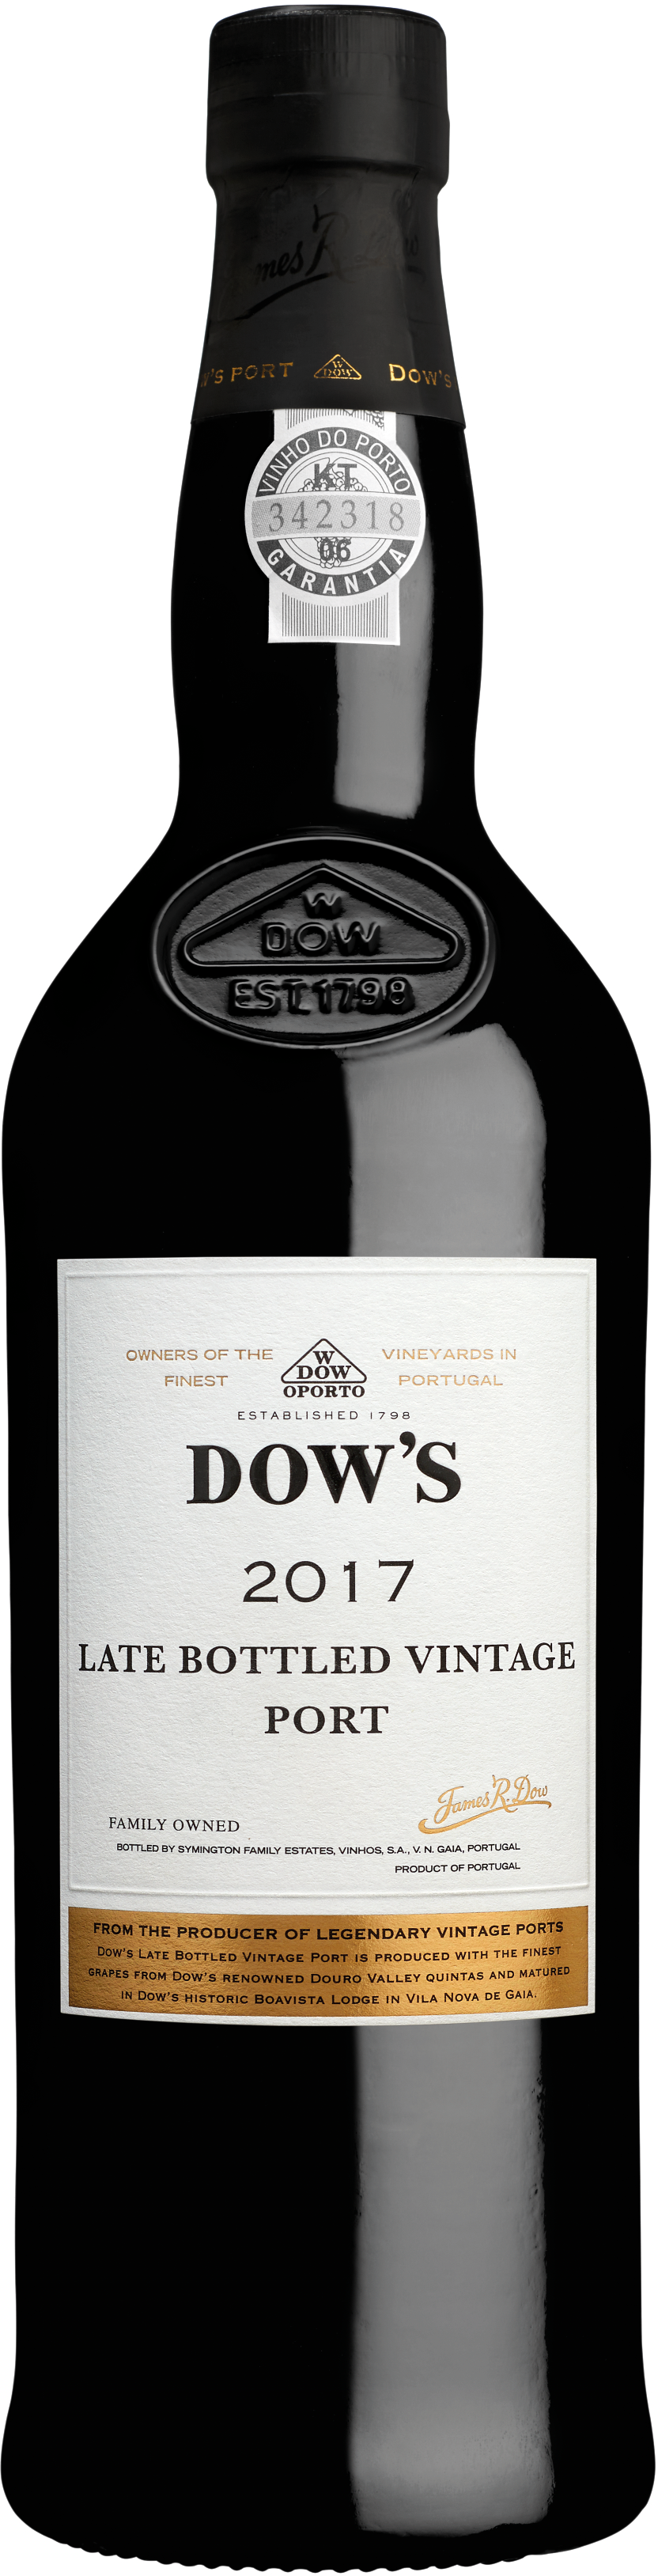 Product Image for DOW'S LATE BOTTLED VINTAGE PORT 2017